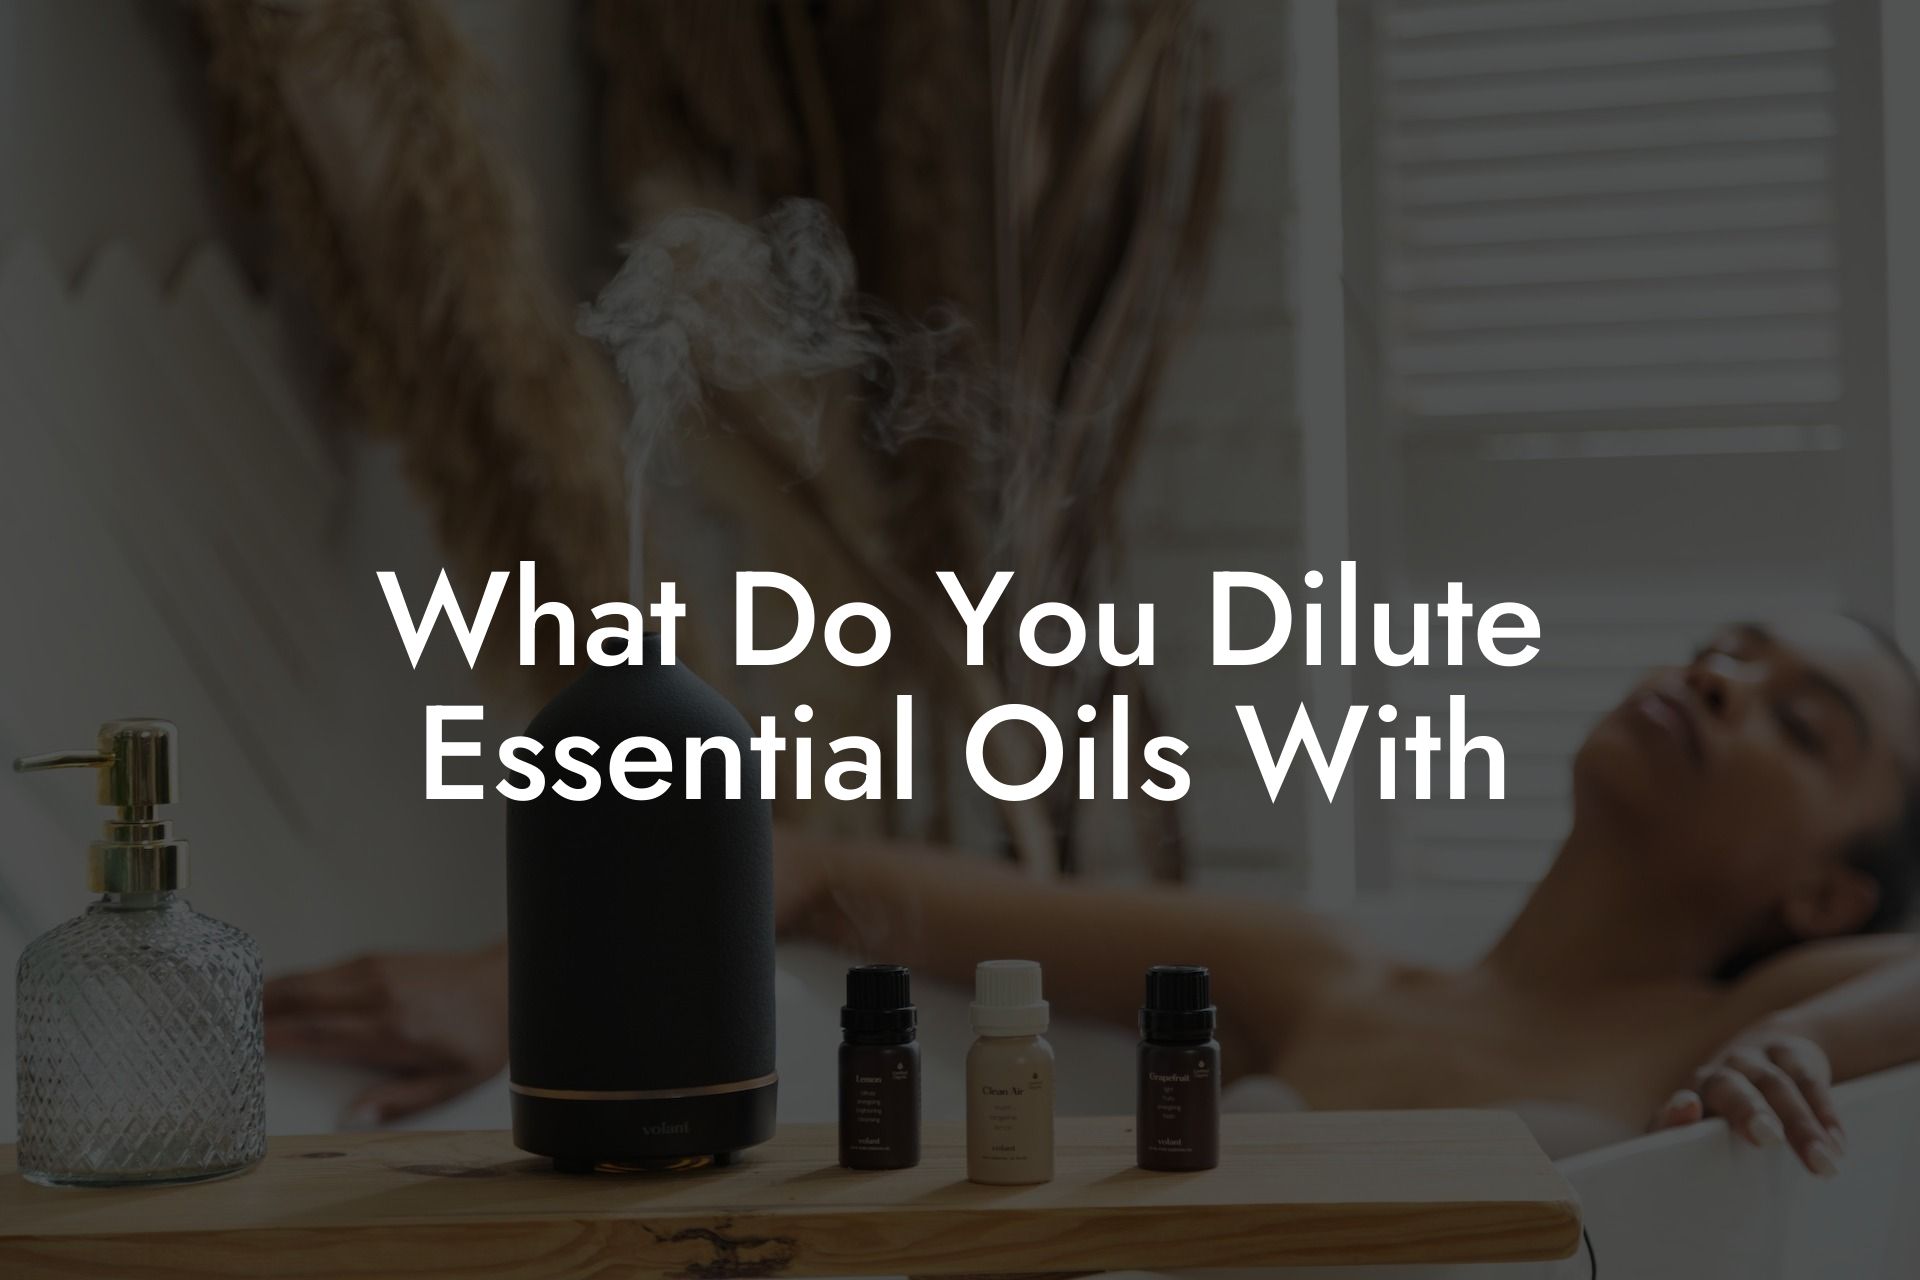 What Do You Dilute Essential Oils With